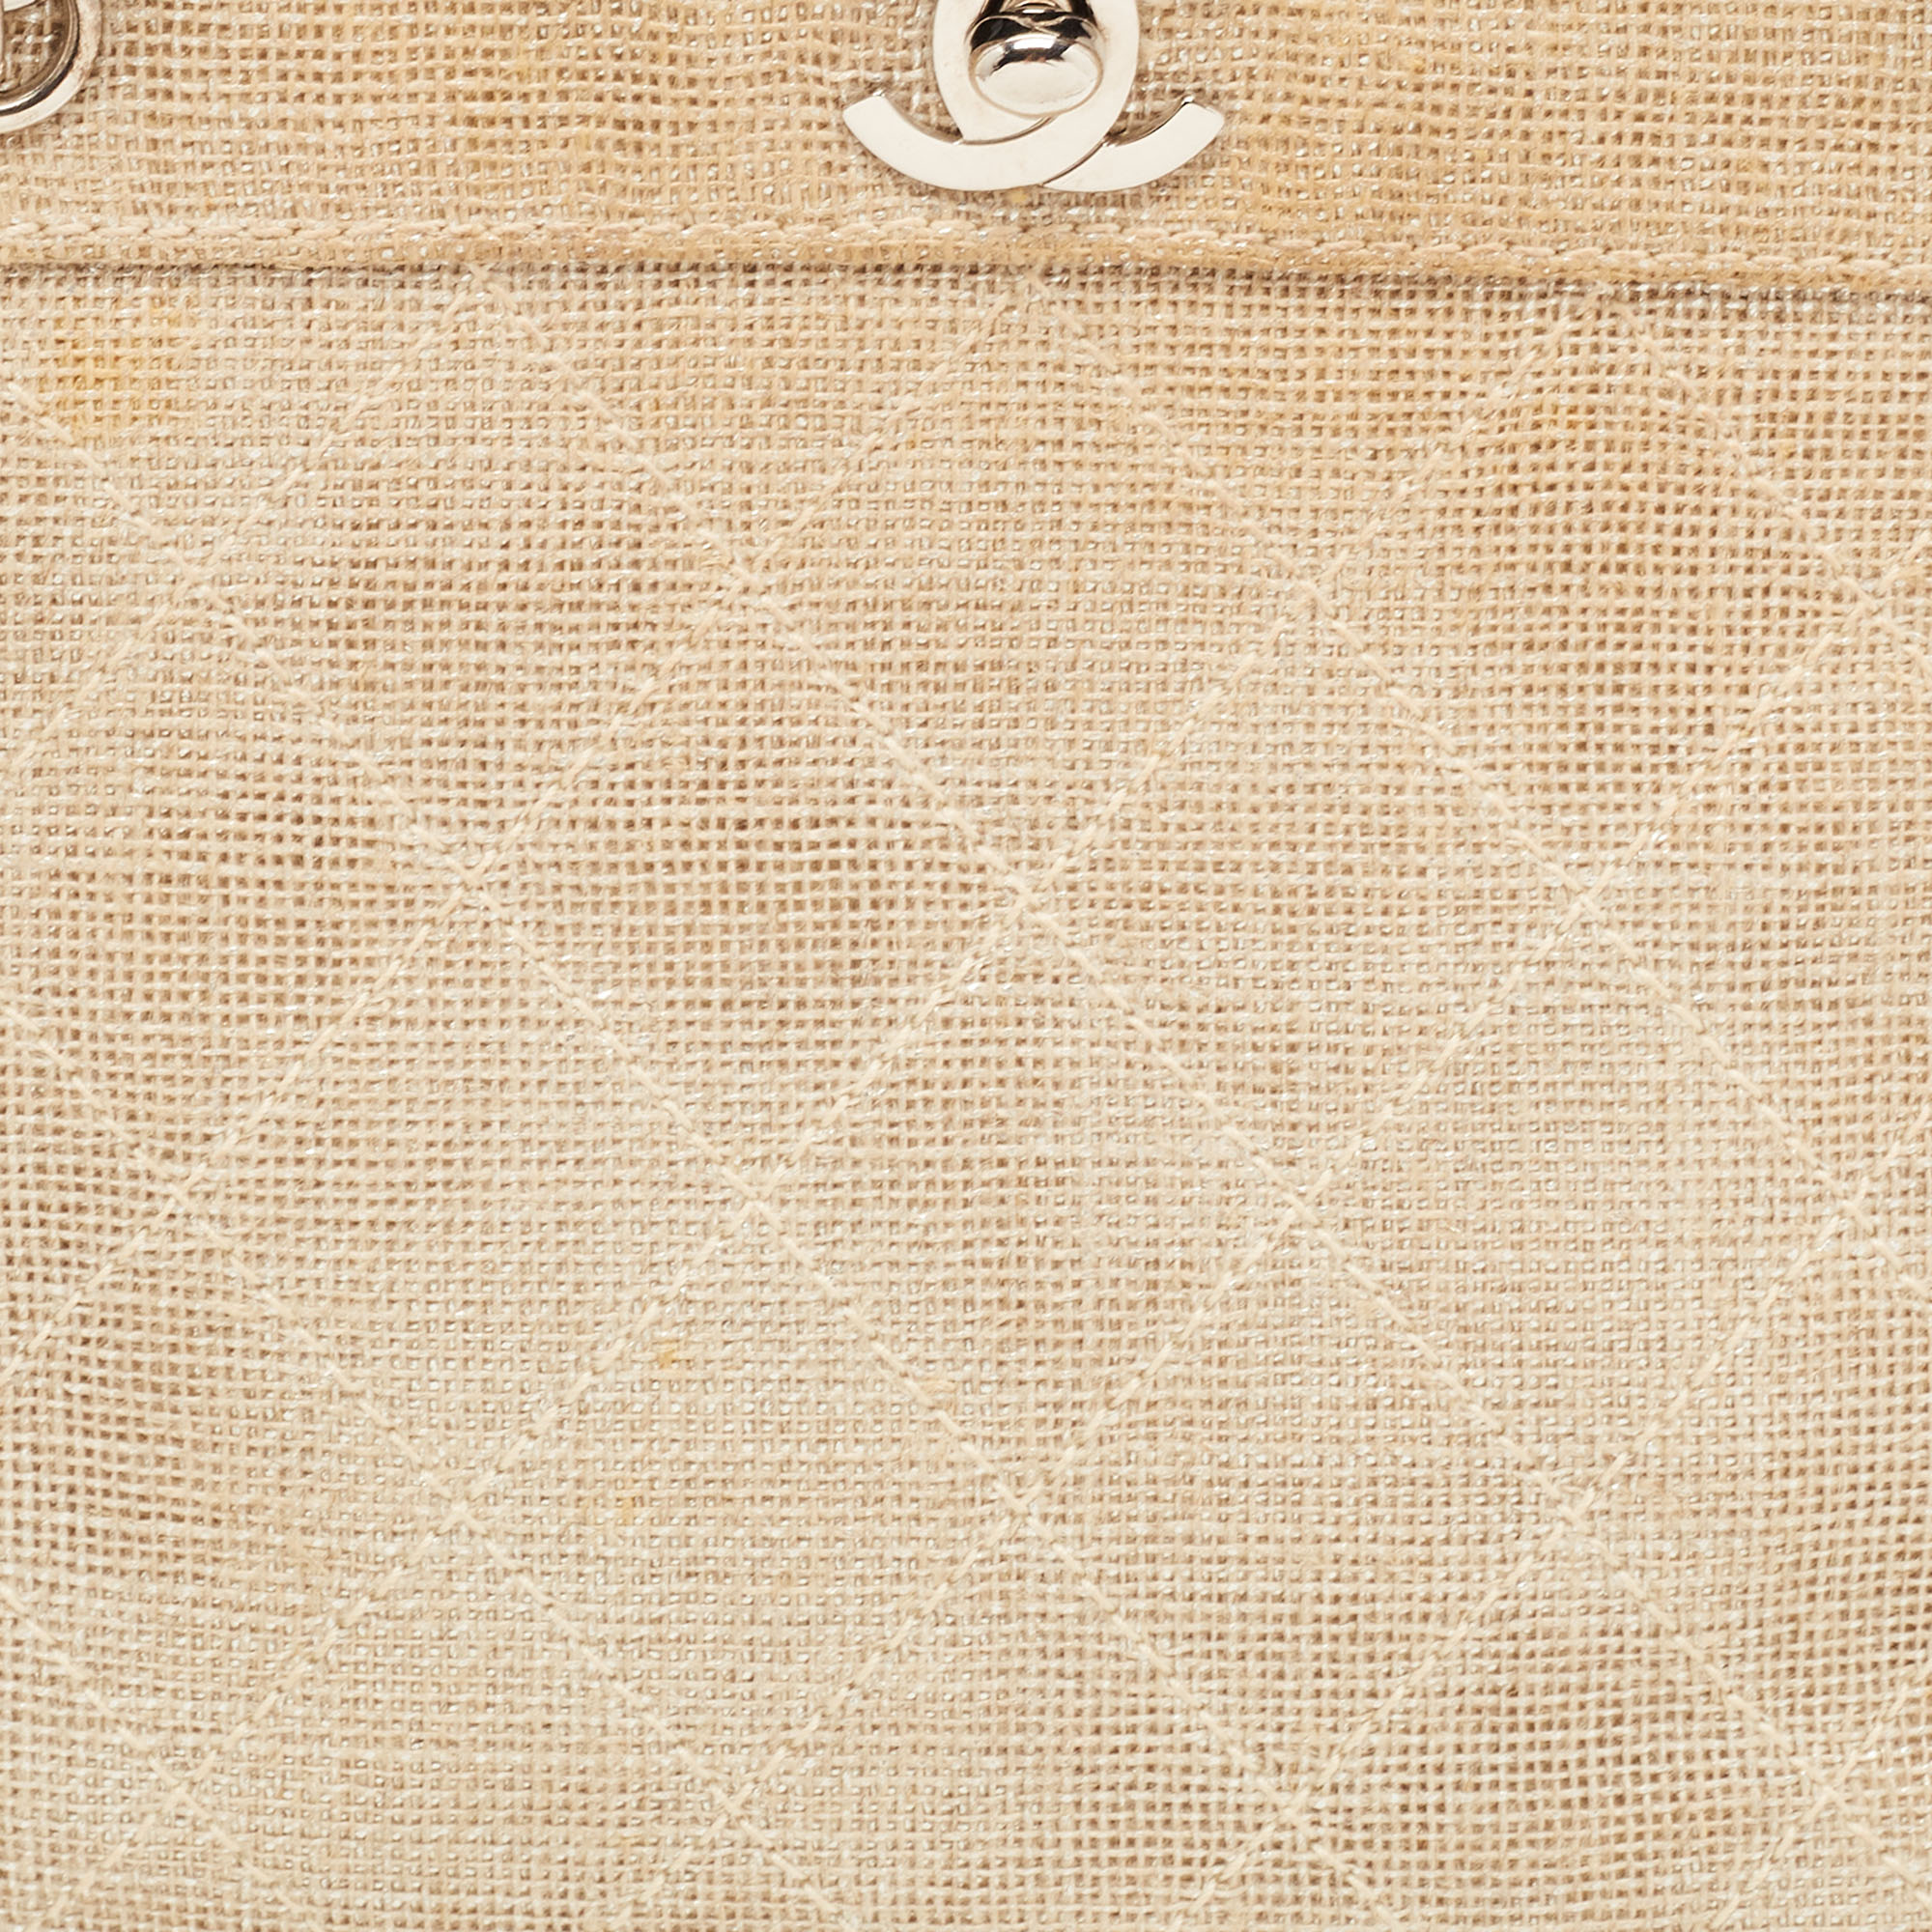 Chanel Metallic Beige Quilted Canvas Mini Classic Chain Tote